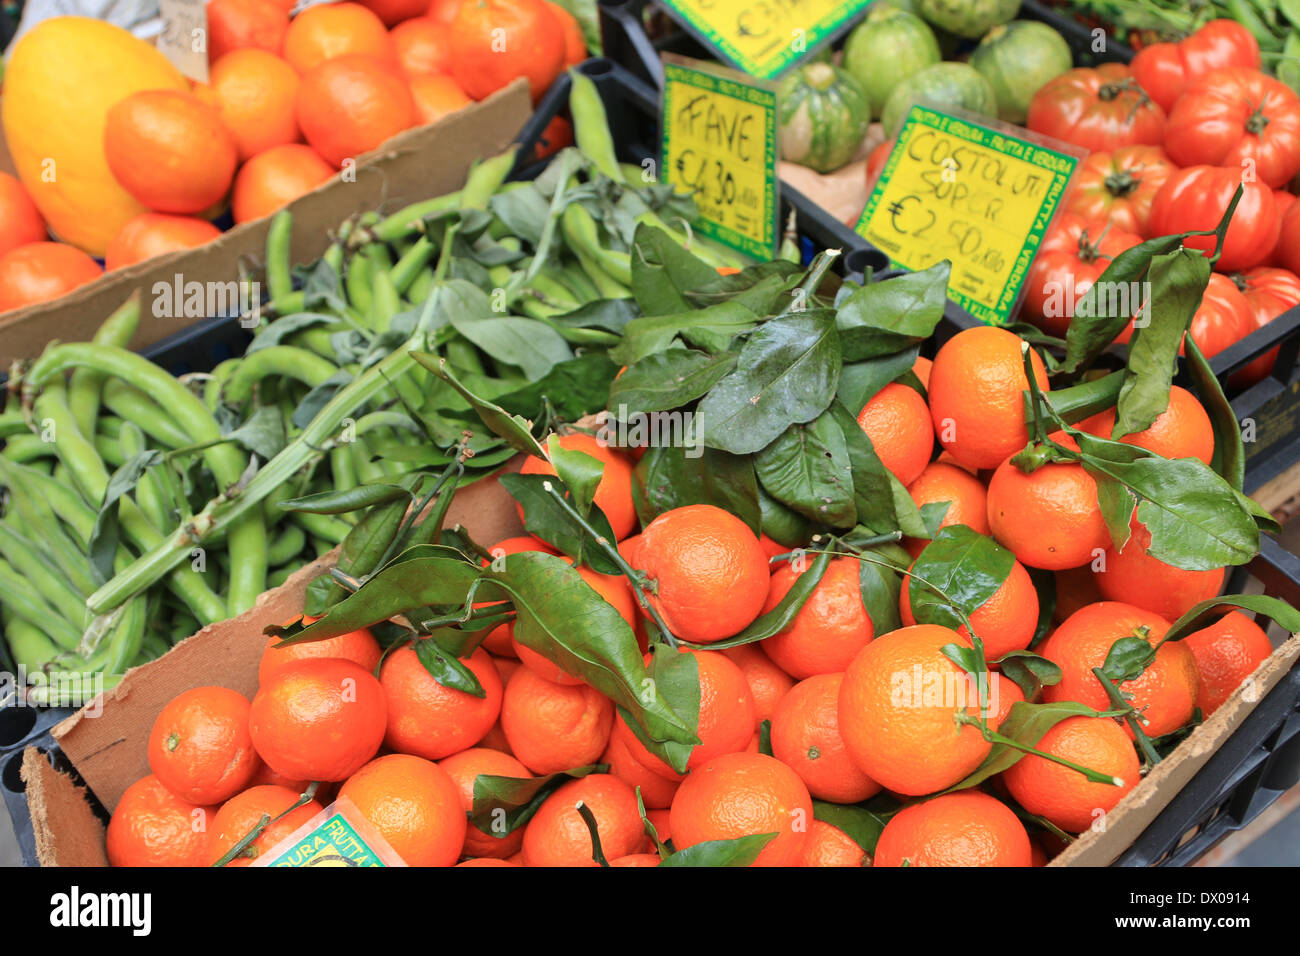 Fresh fruit and vegetables on sale with Euro prices. Stock Photo